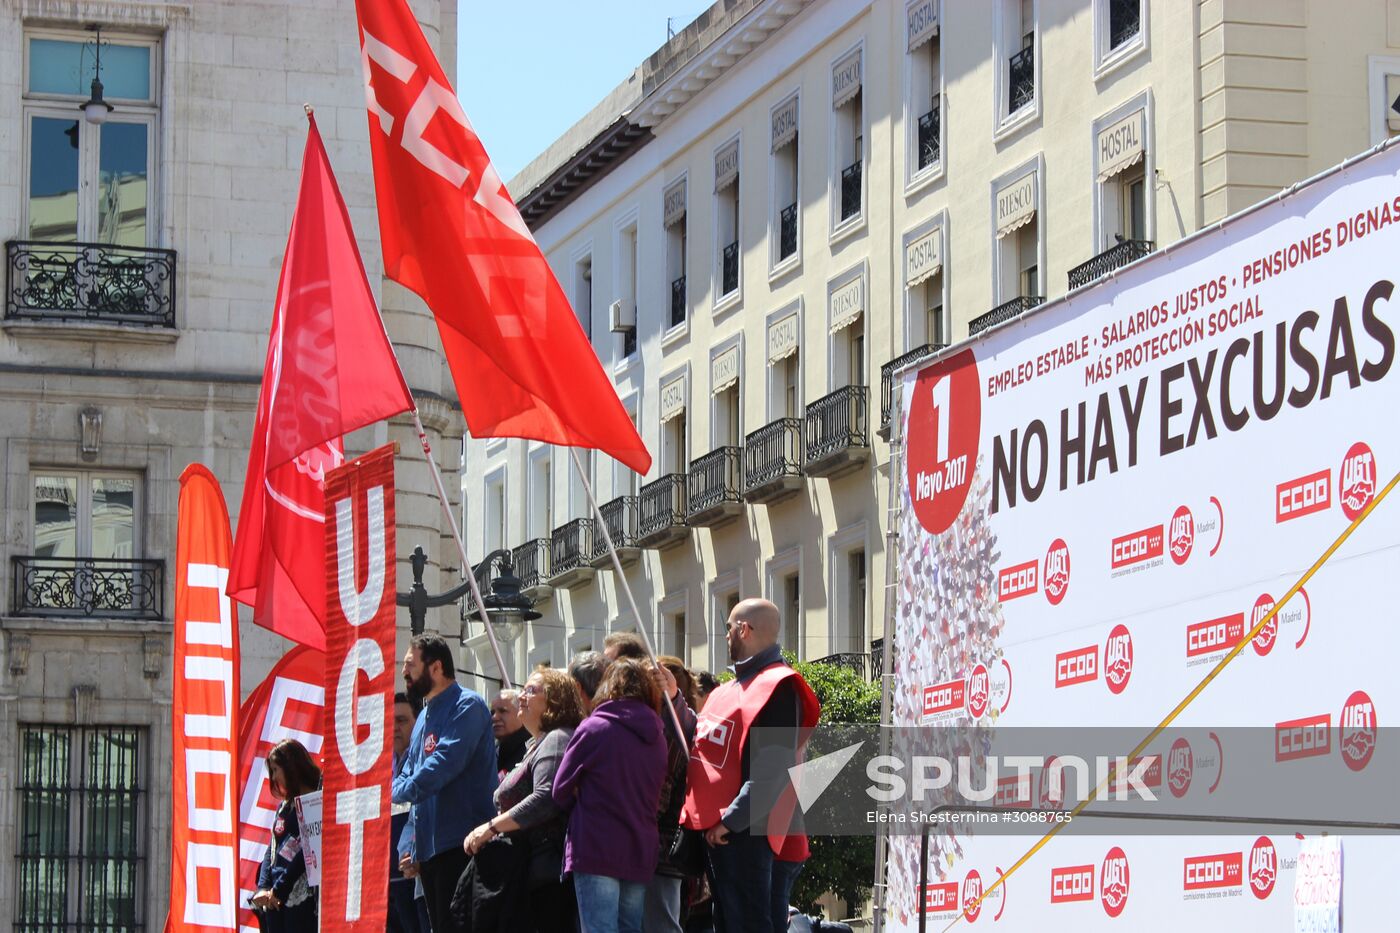 Events on International Workers' Solidarity Day abroad